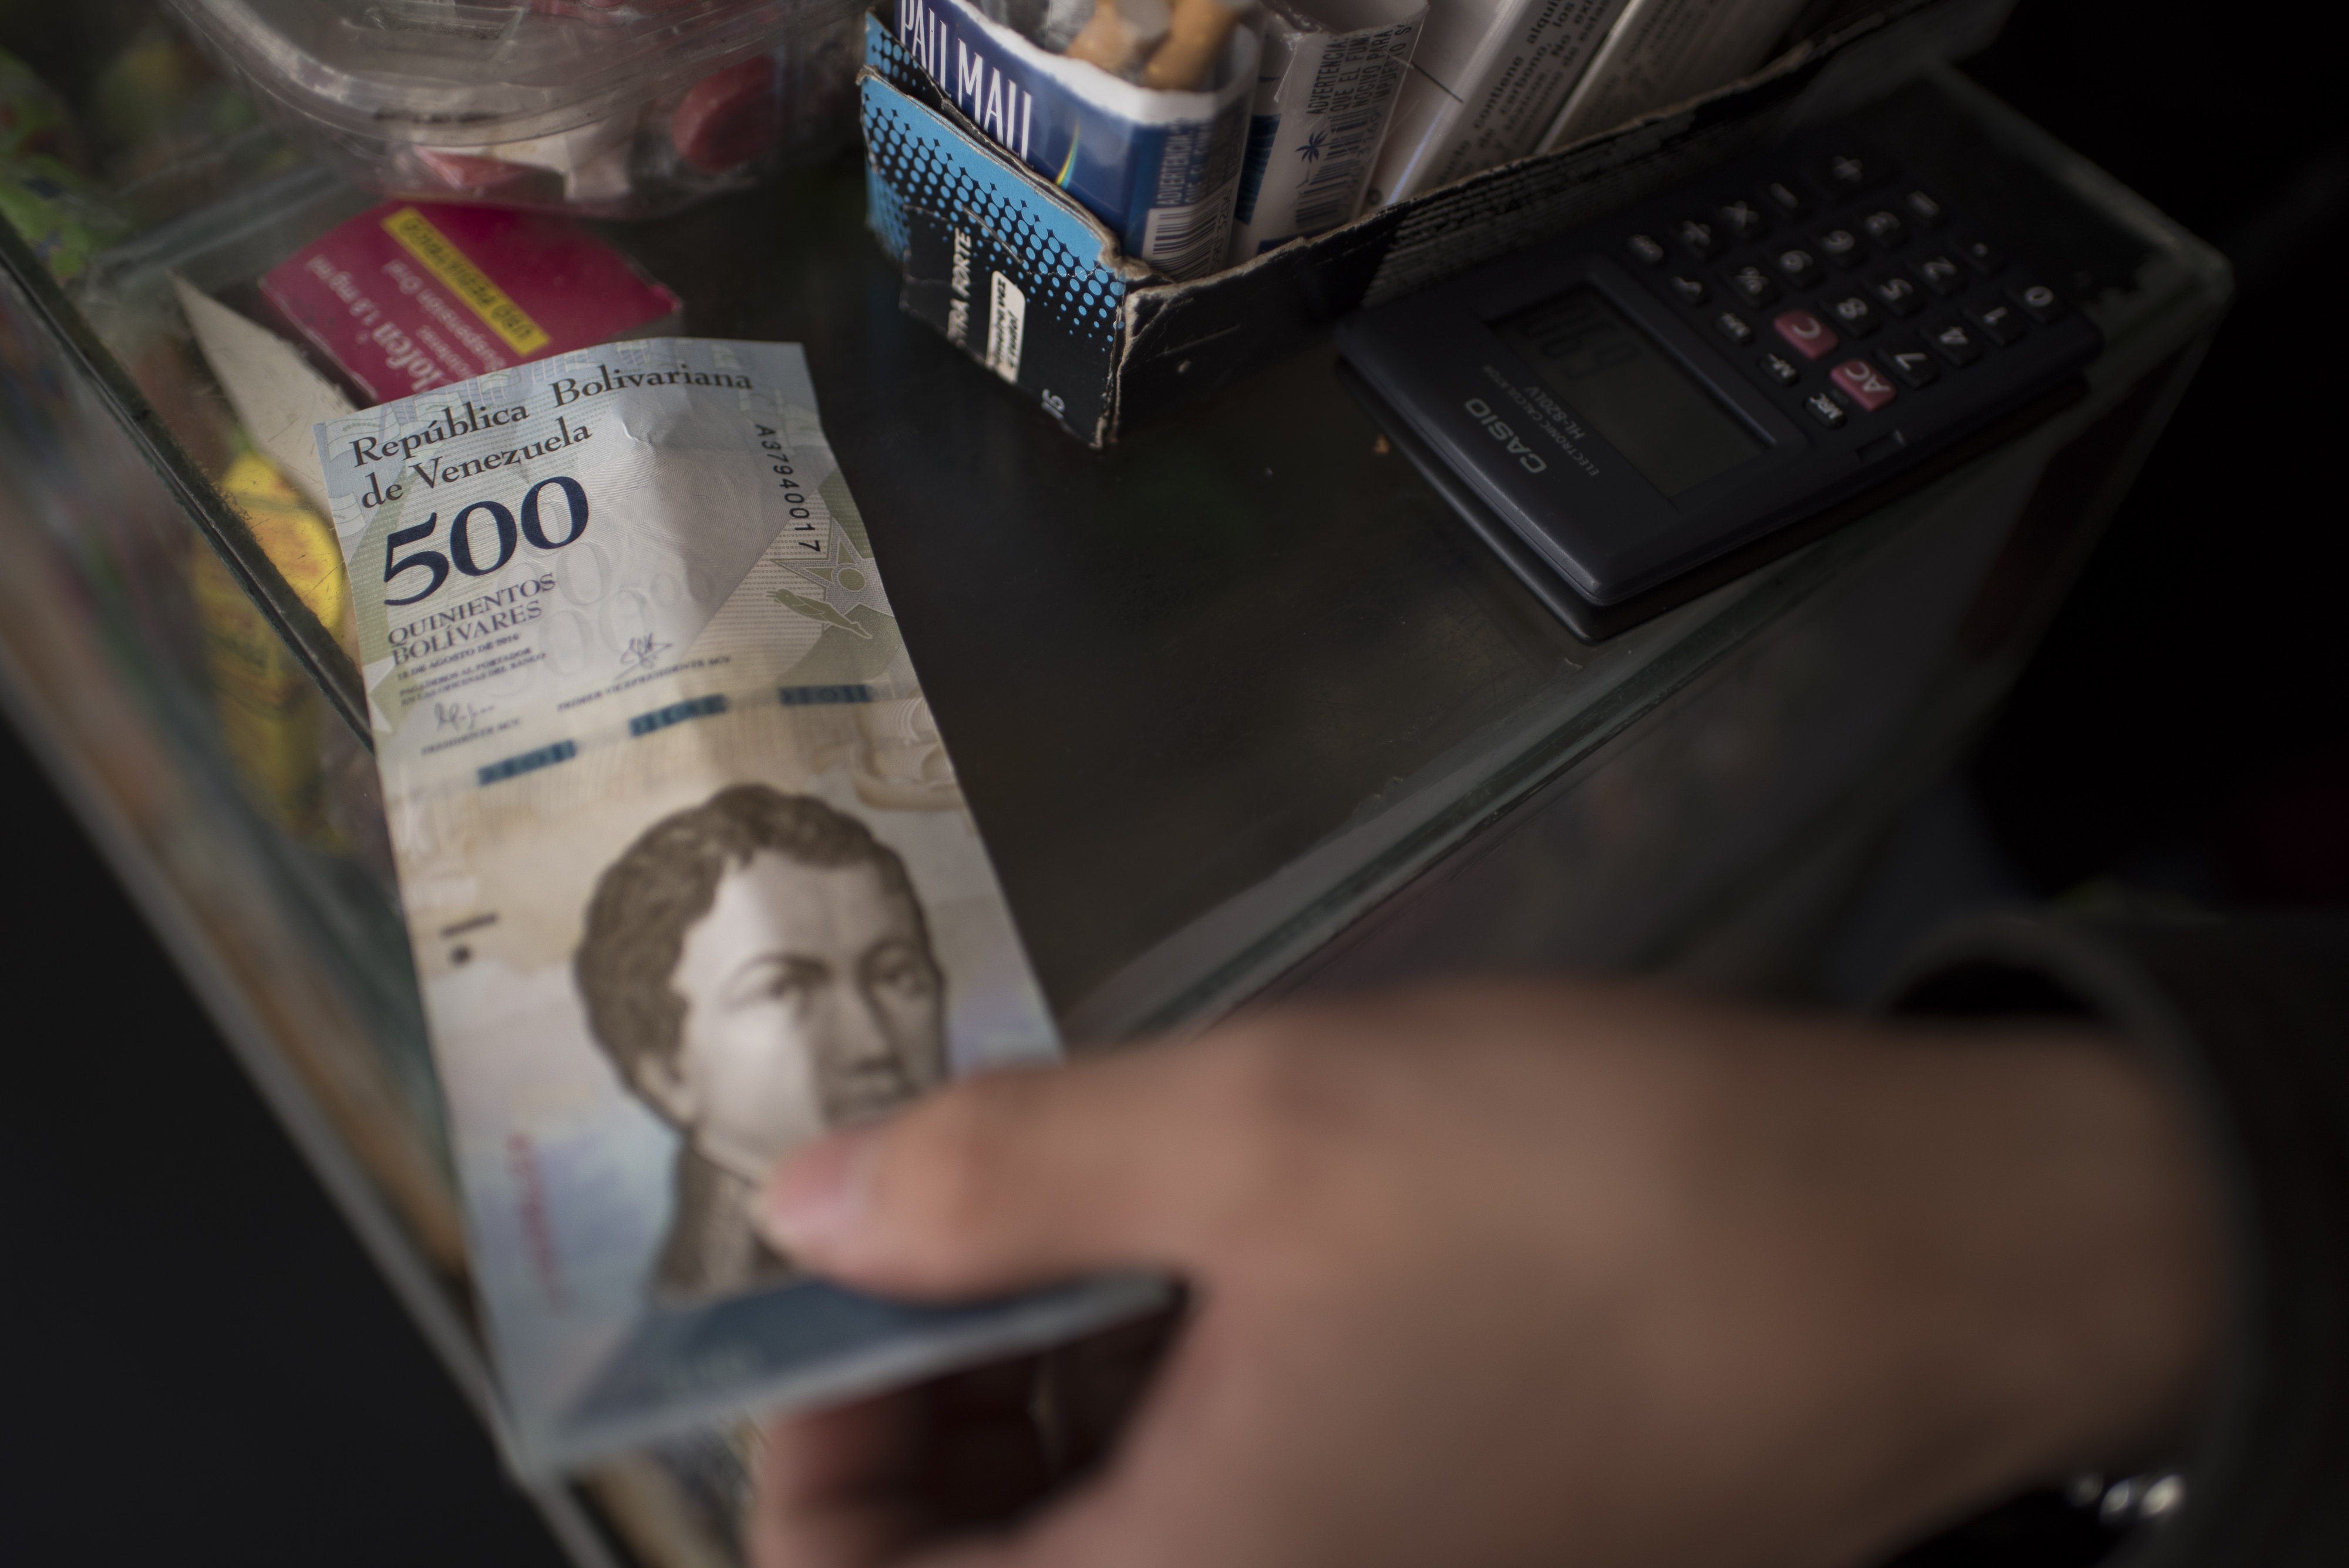 New Banknotes Begin Circulating As Inflation Soars Into Triple Digits